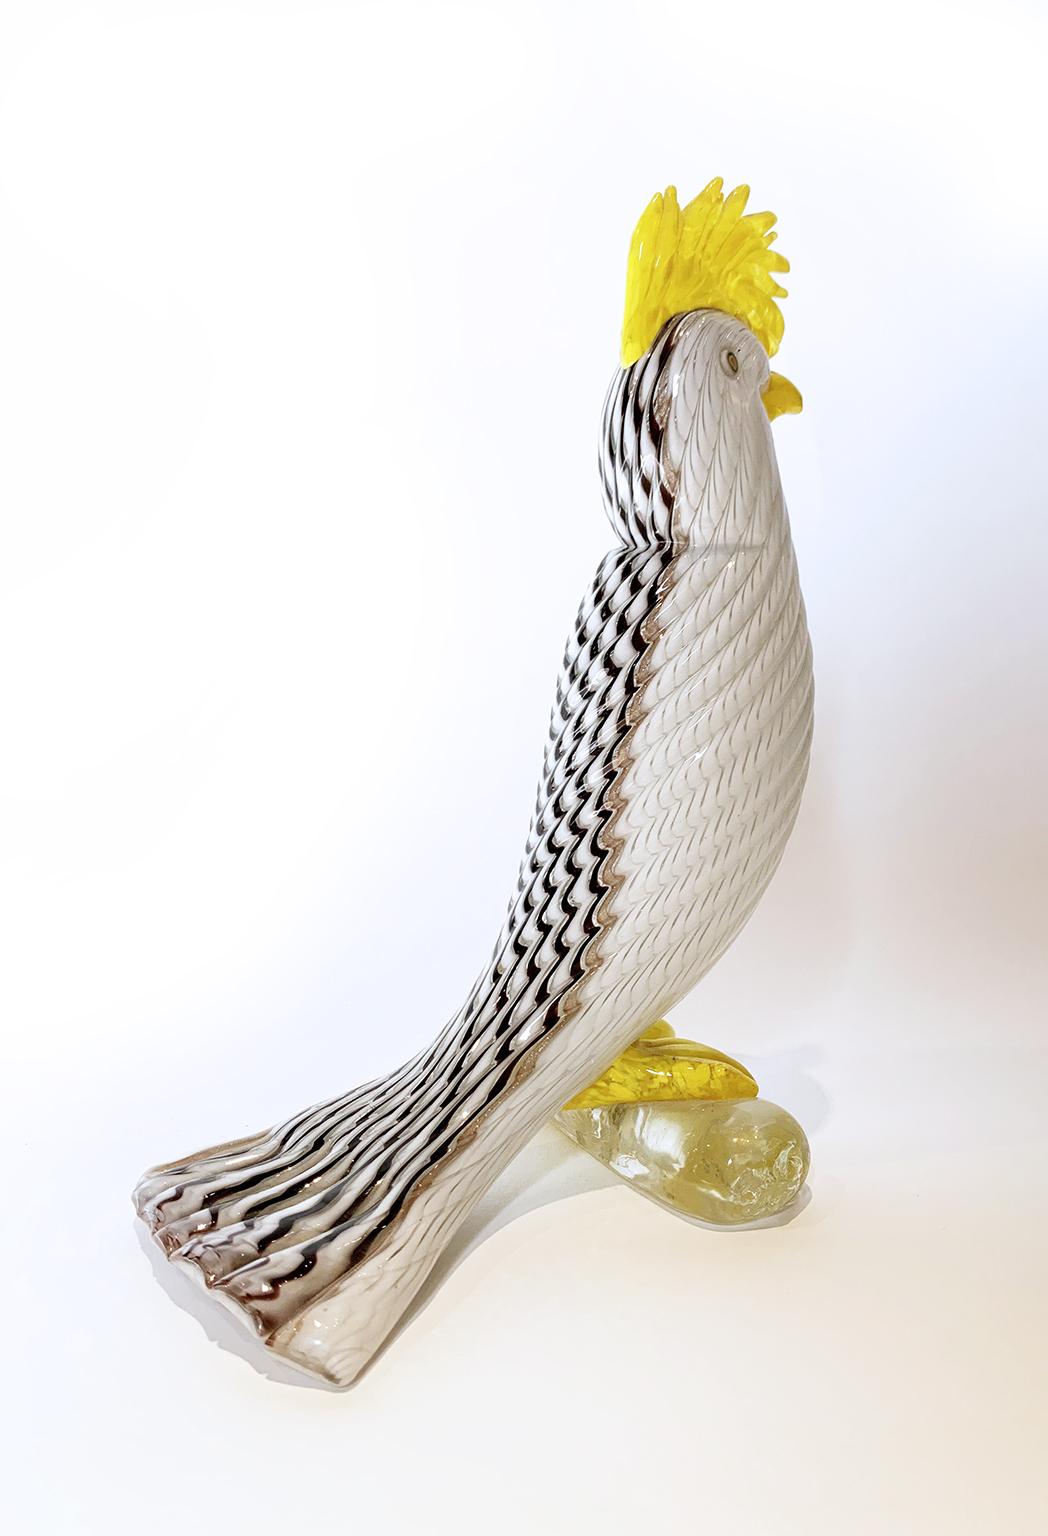 Glass Parrot-Shaped Sculpture, Dino Martens, Venice, Aureliano Toso, 1953-1956 In Excellent Condition For Sale In Milano, IT